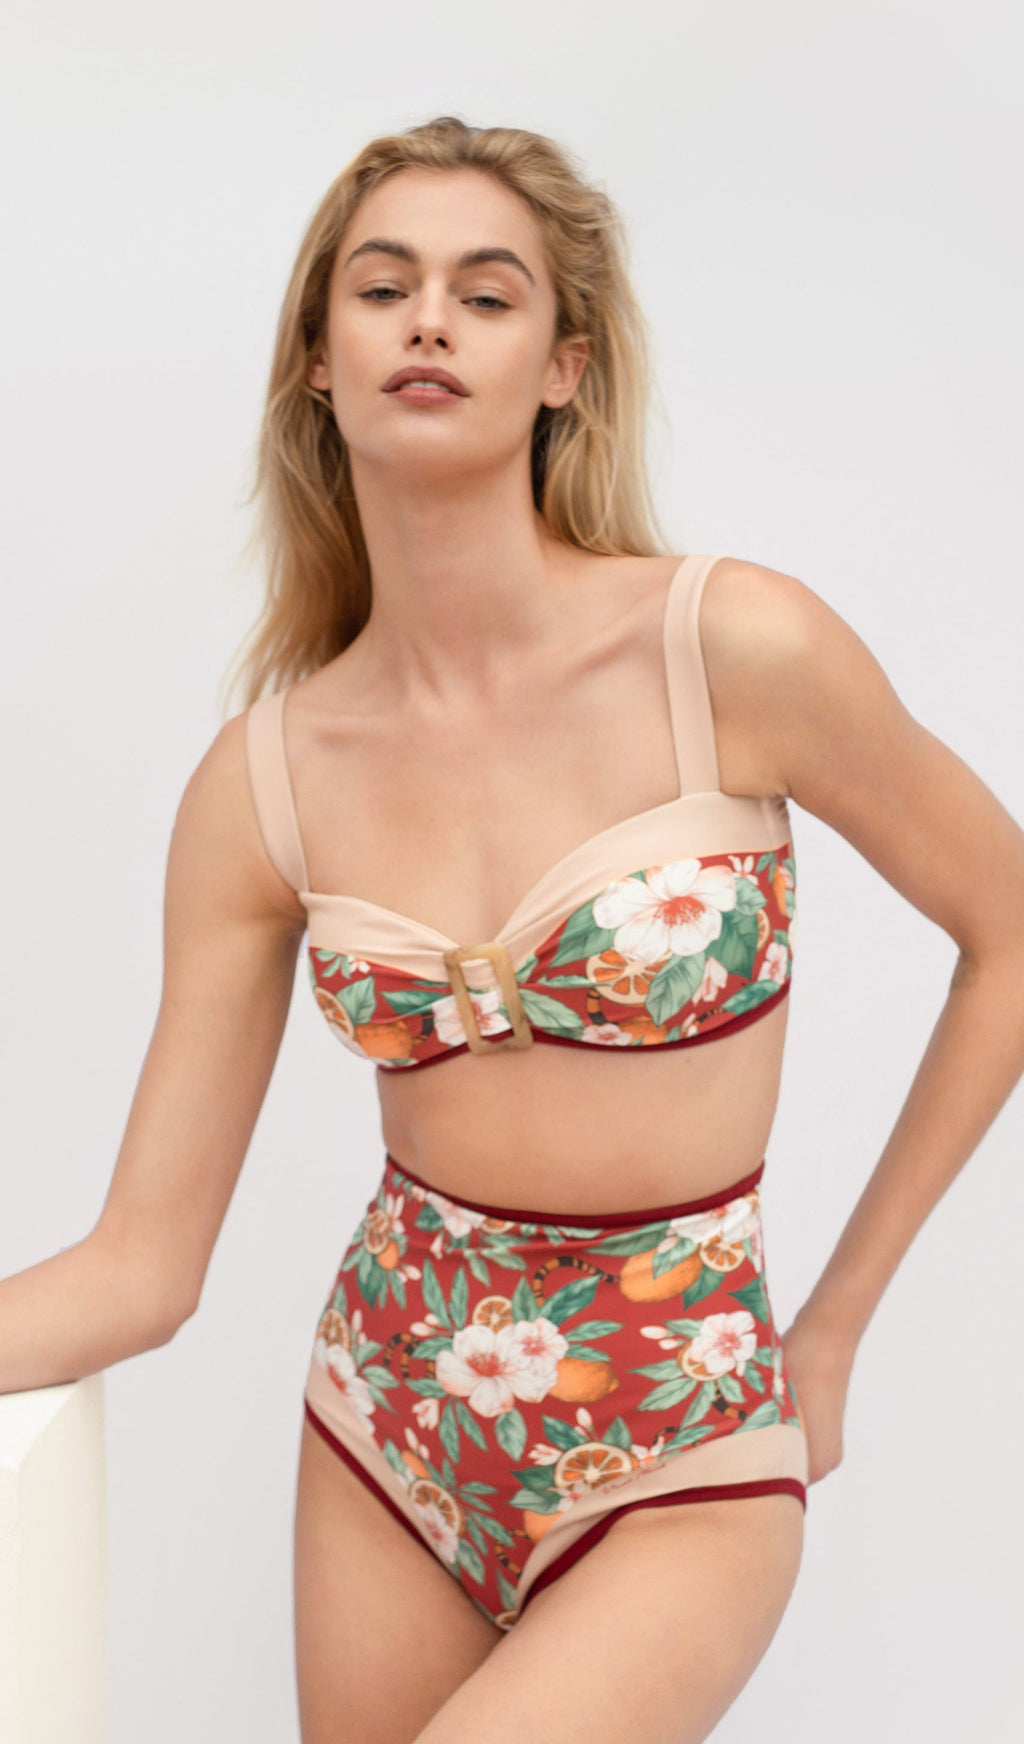 Online places to buy swimwear - womens printed bikini sets online - pool party essentials